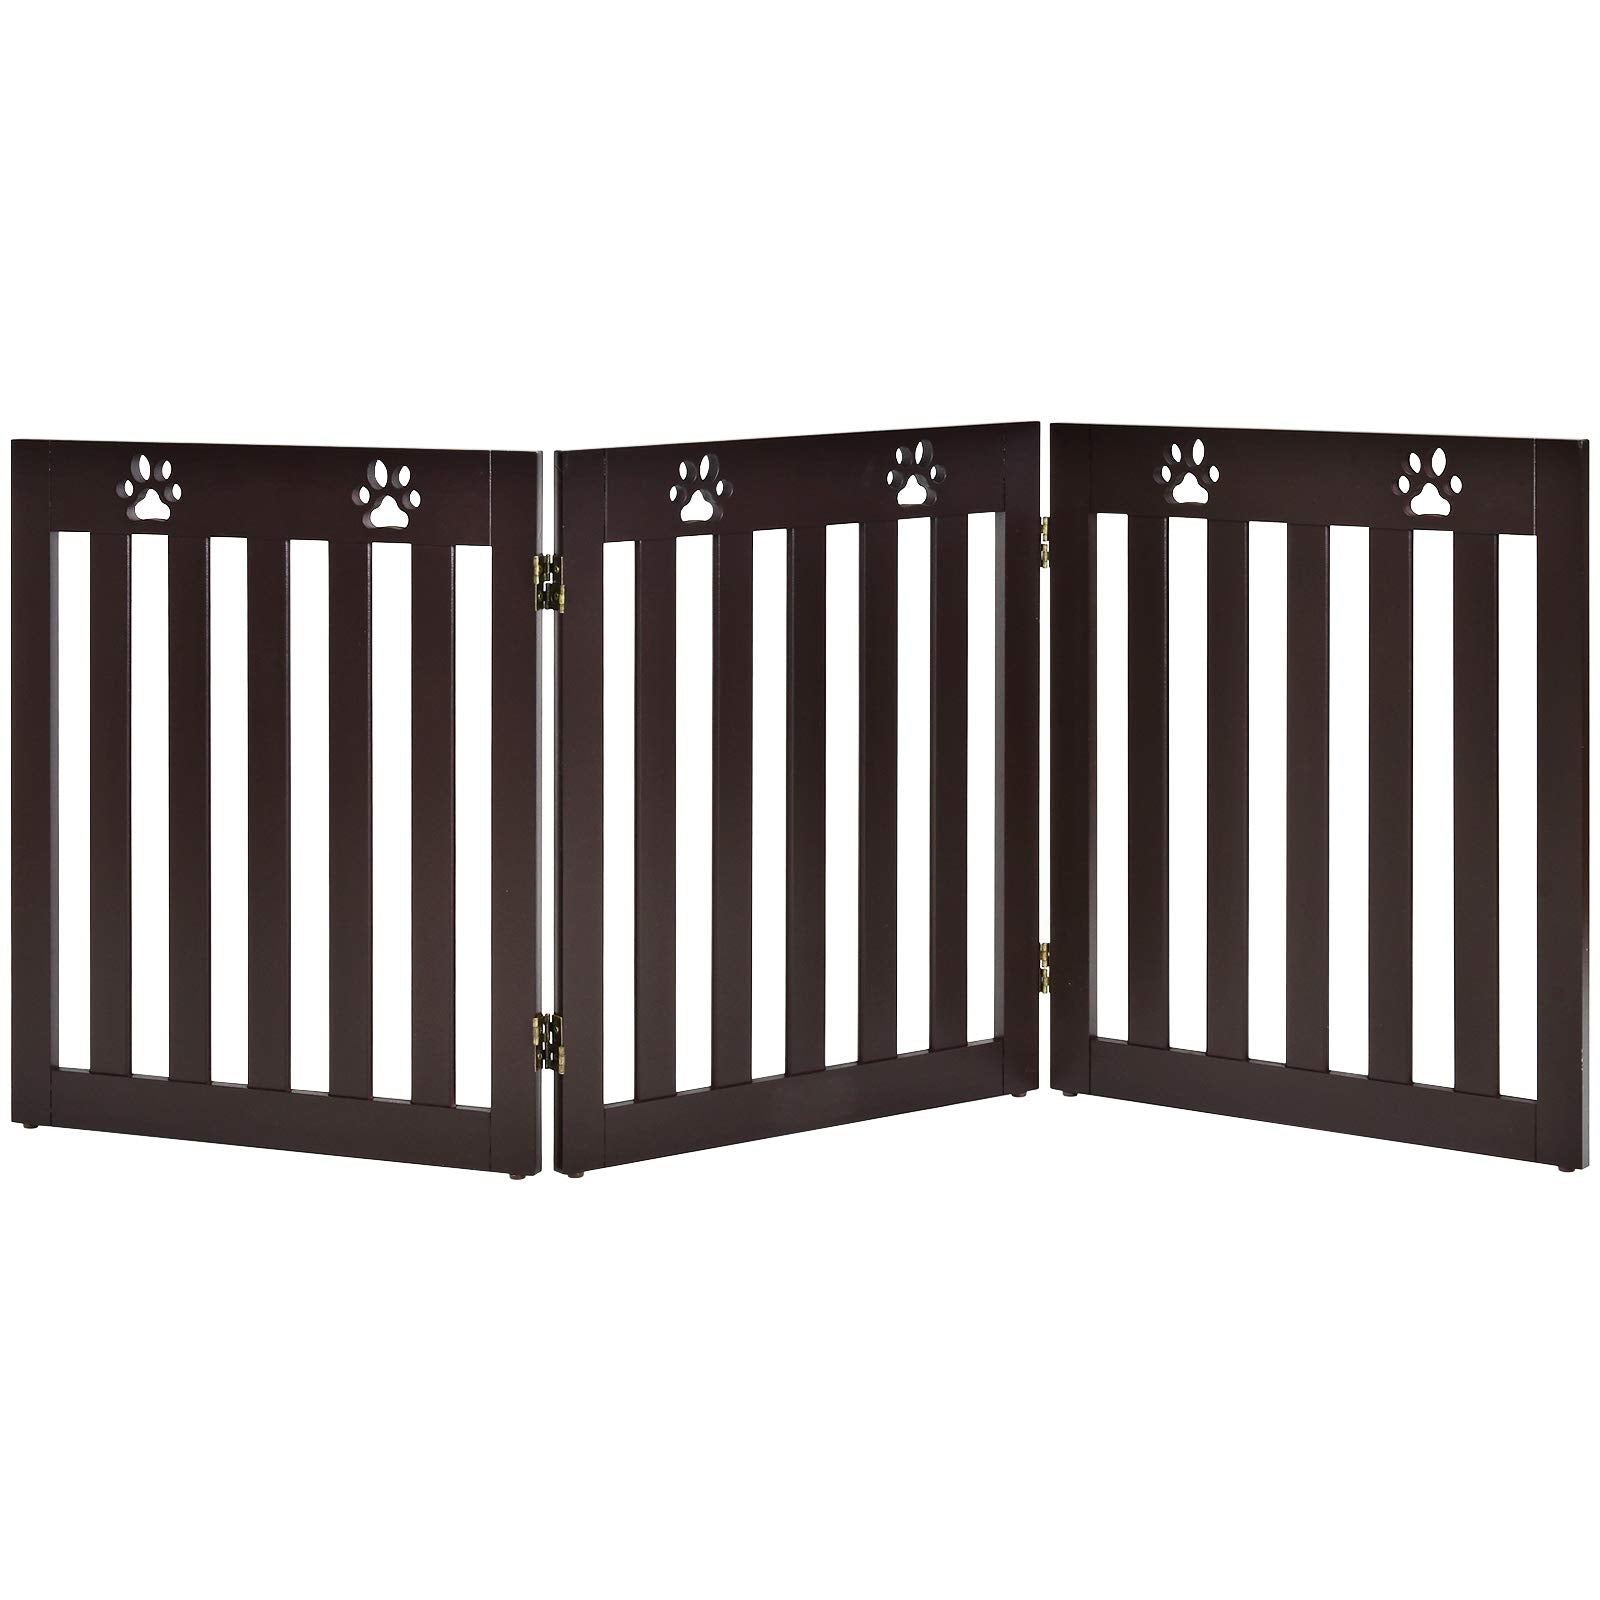 Giantex Wooden Freestanding Pet Gate, 3 Panel-24 inch Height Step Over Fence